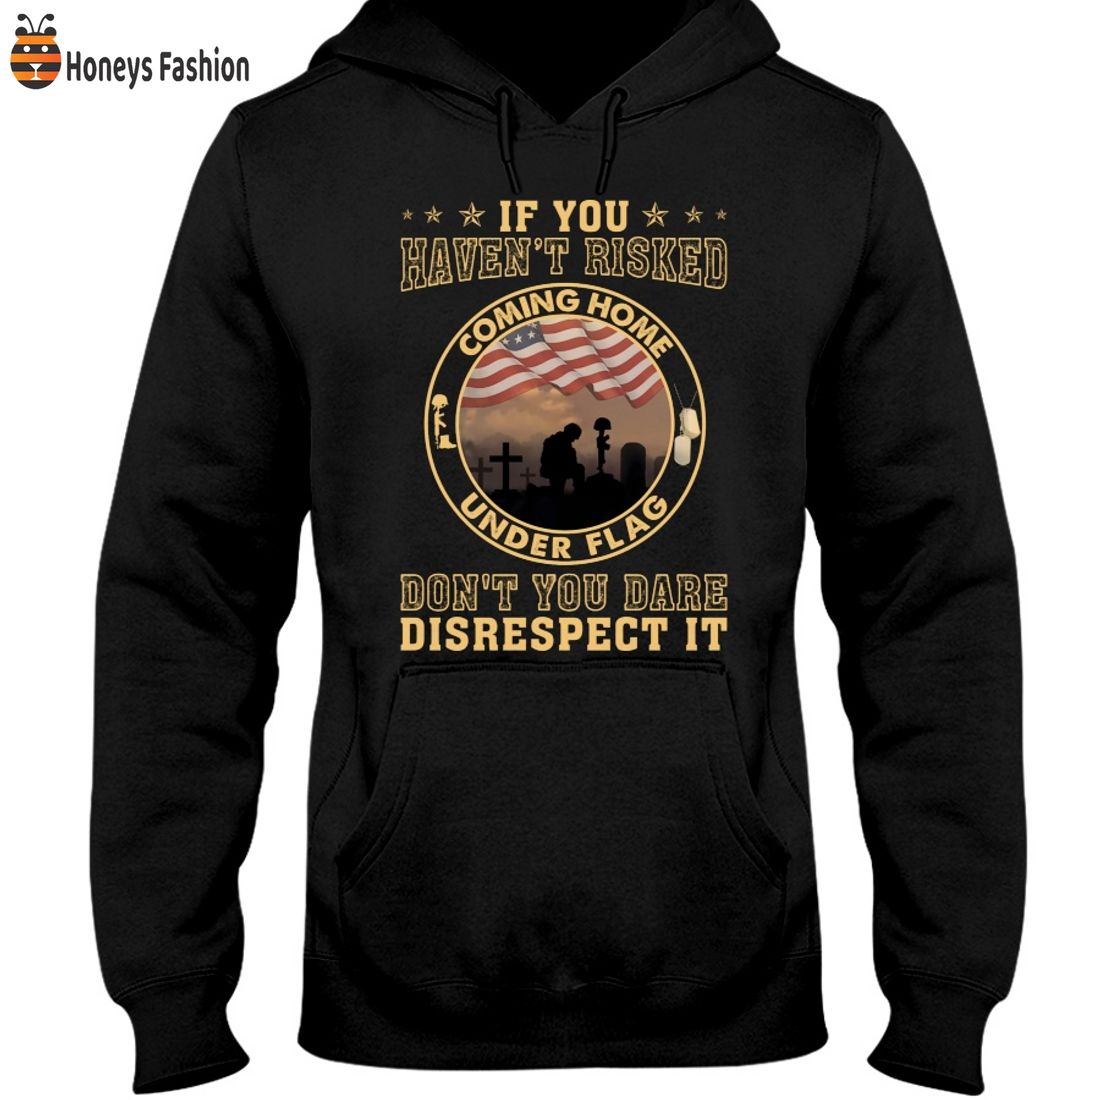 BEST SELLER If You Haven’t Risked Coming Home Under Flag 2D Hoodie Tshirt